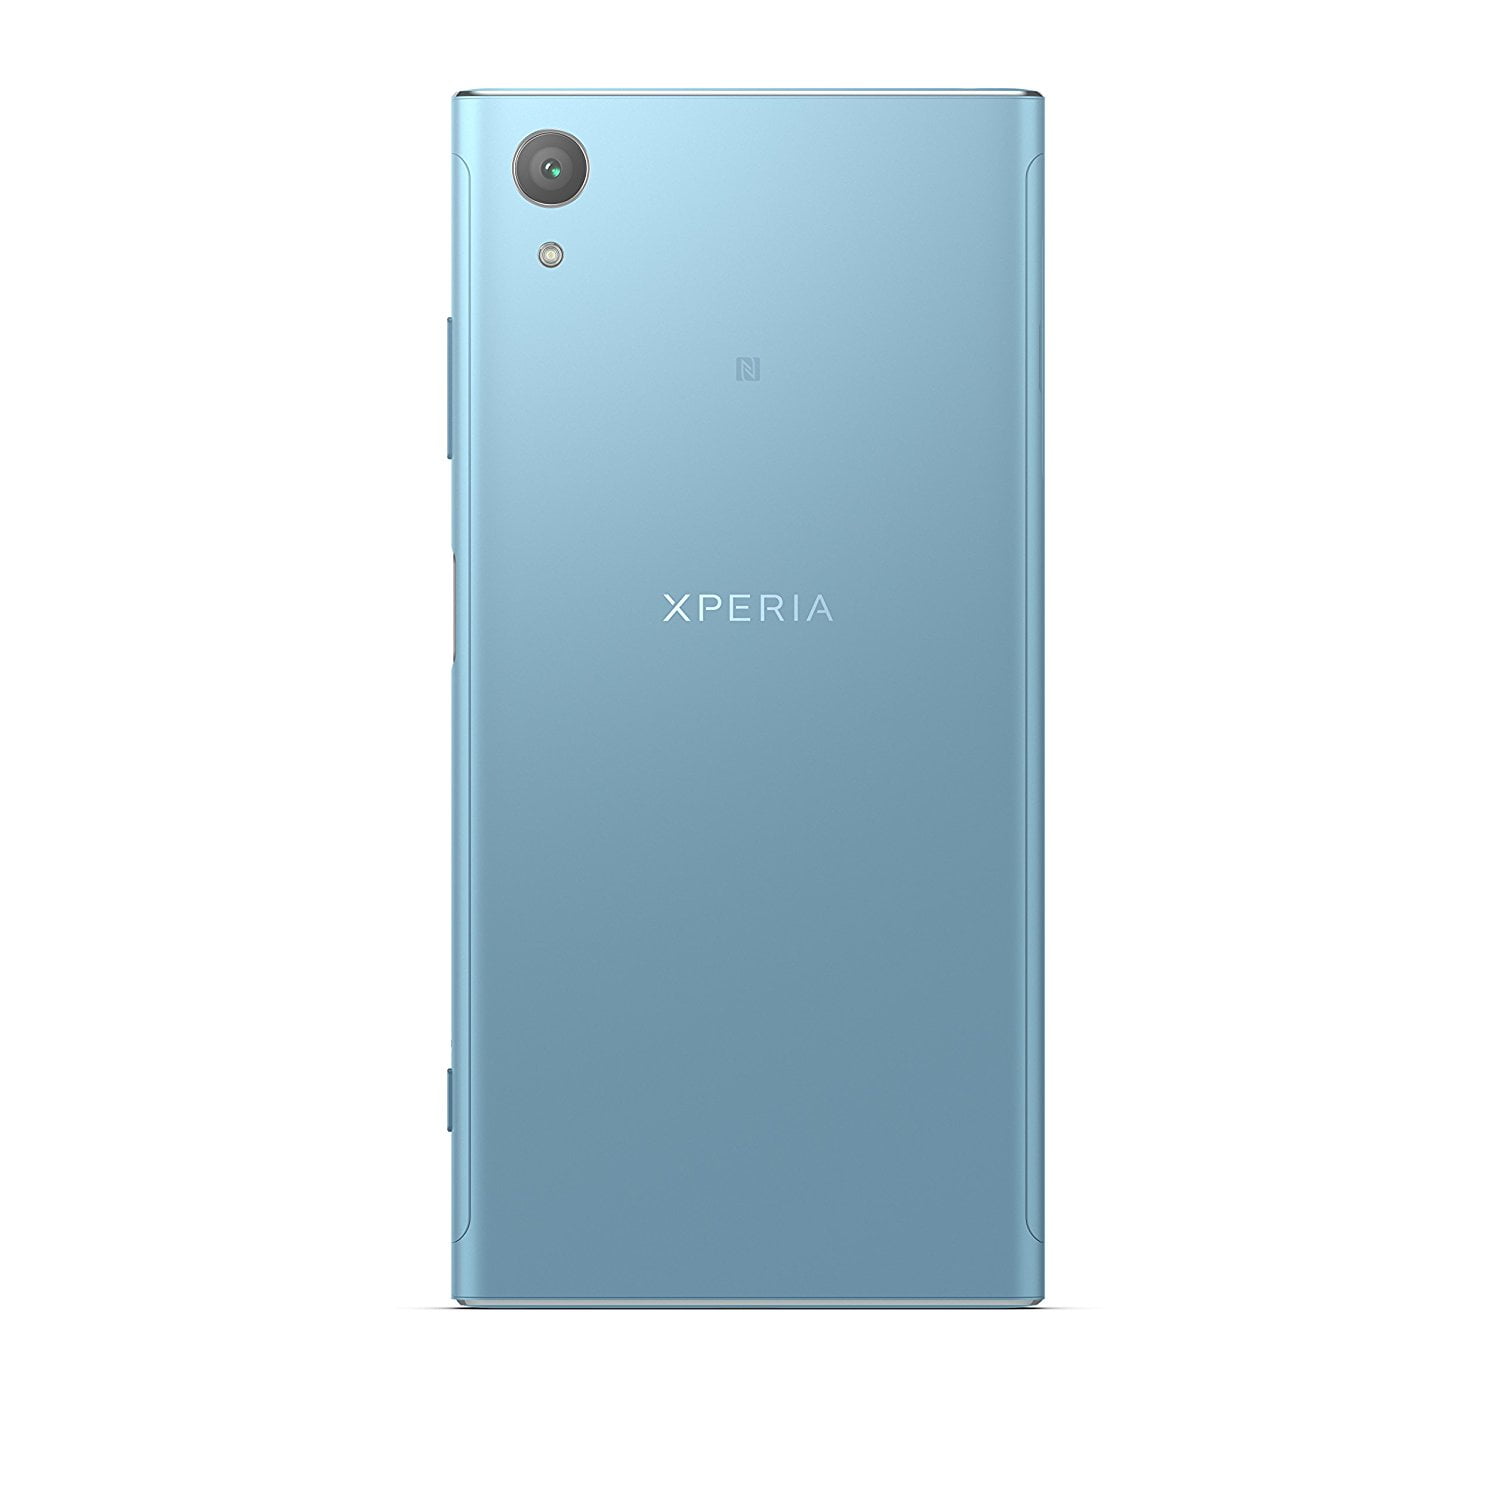 Sony xperia tipo st21i firmware download